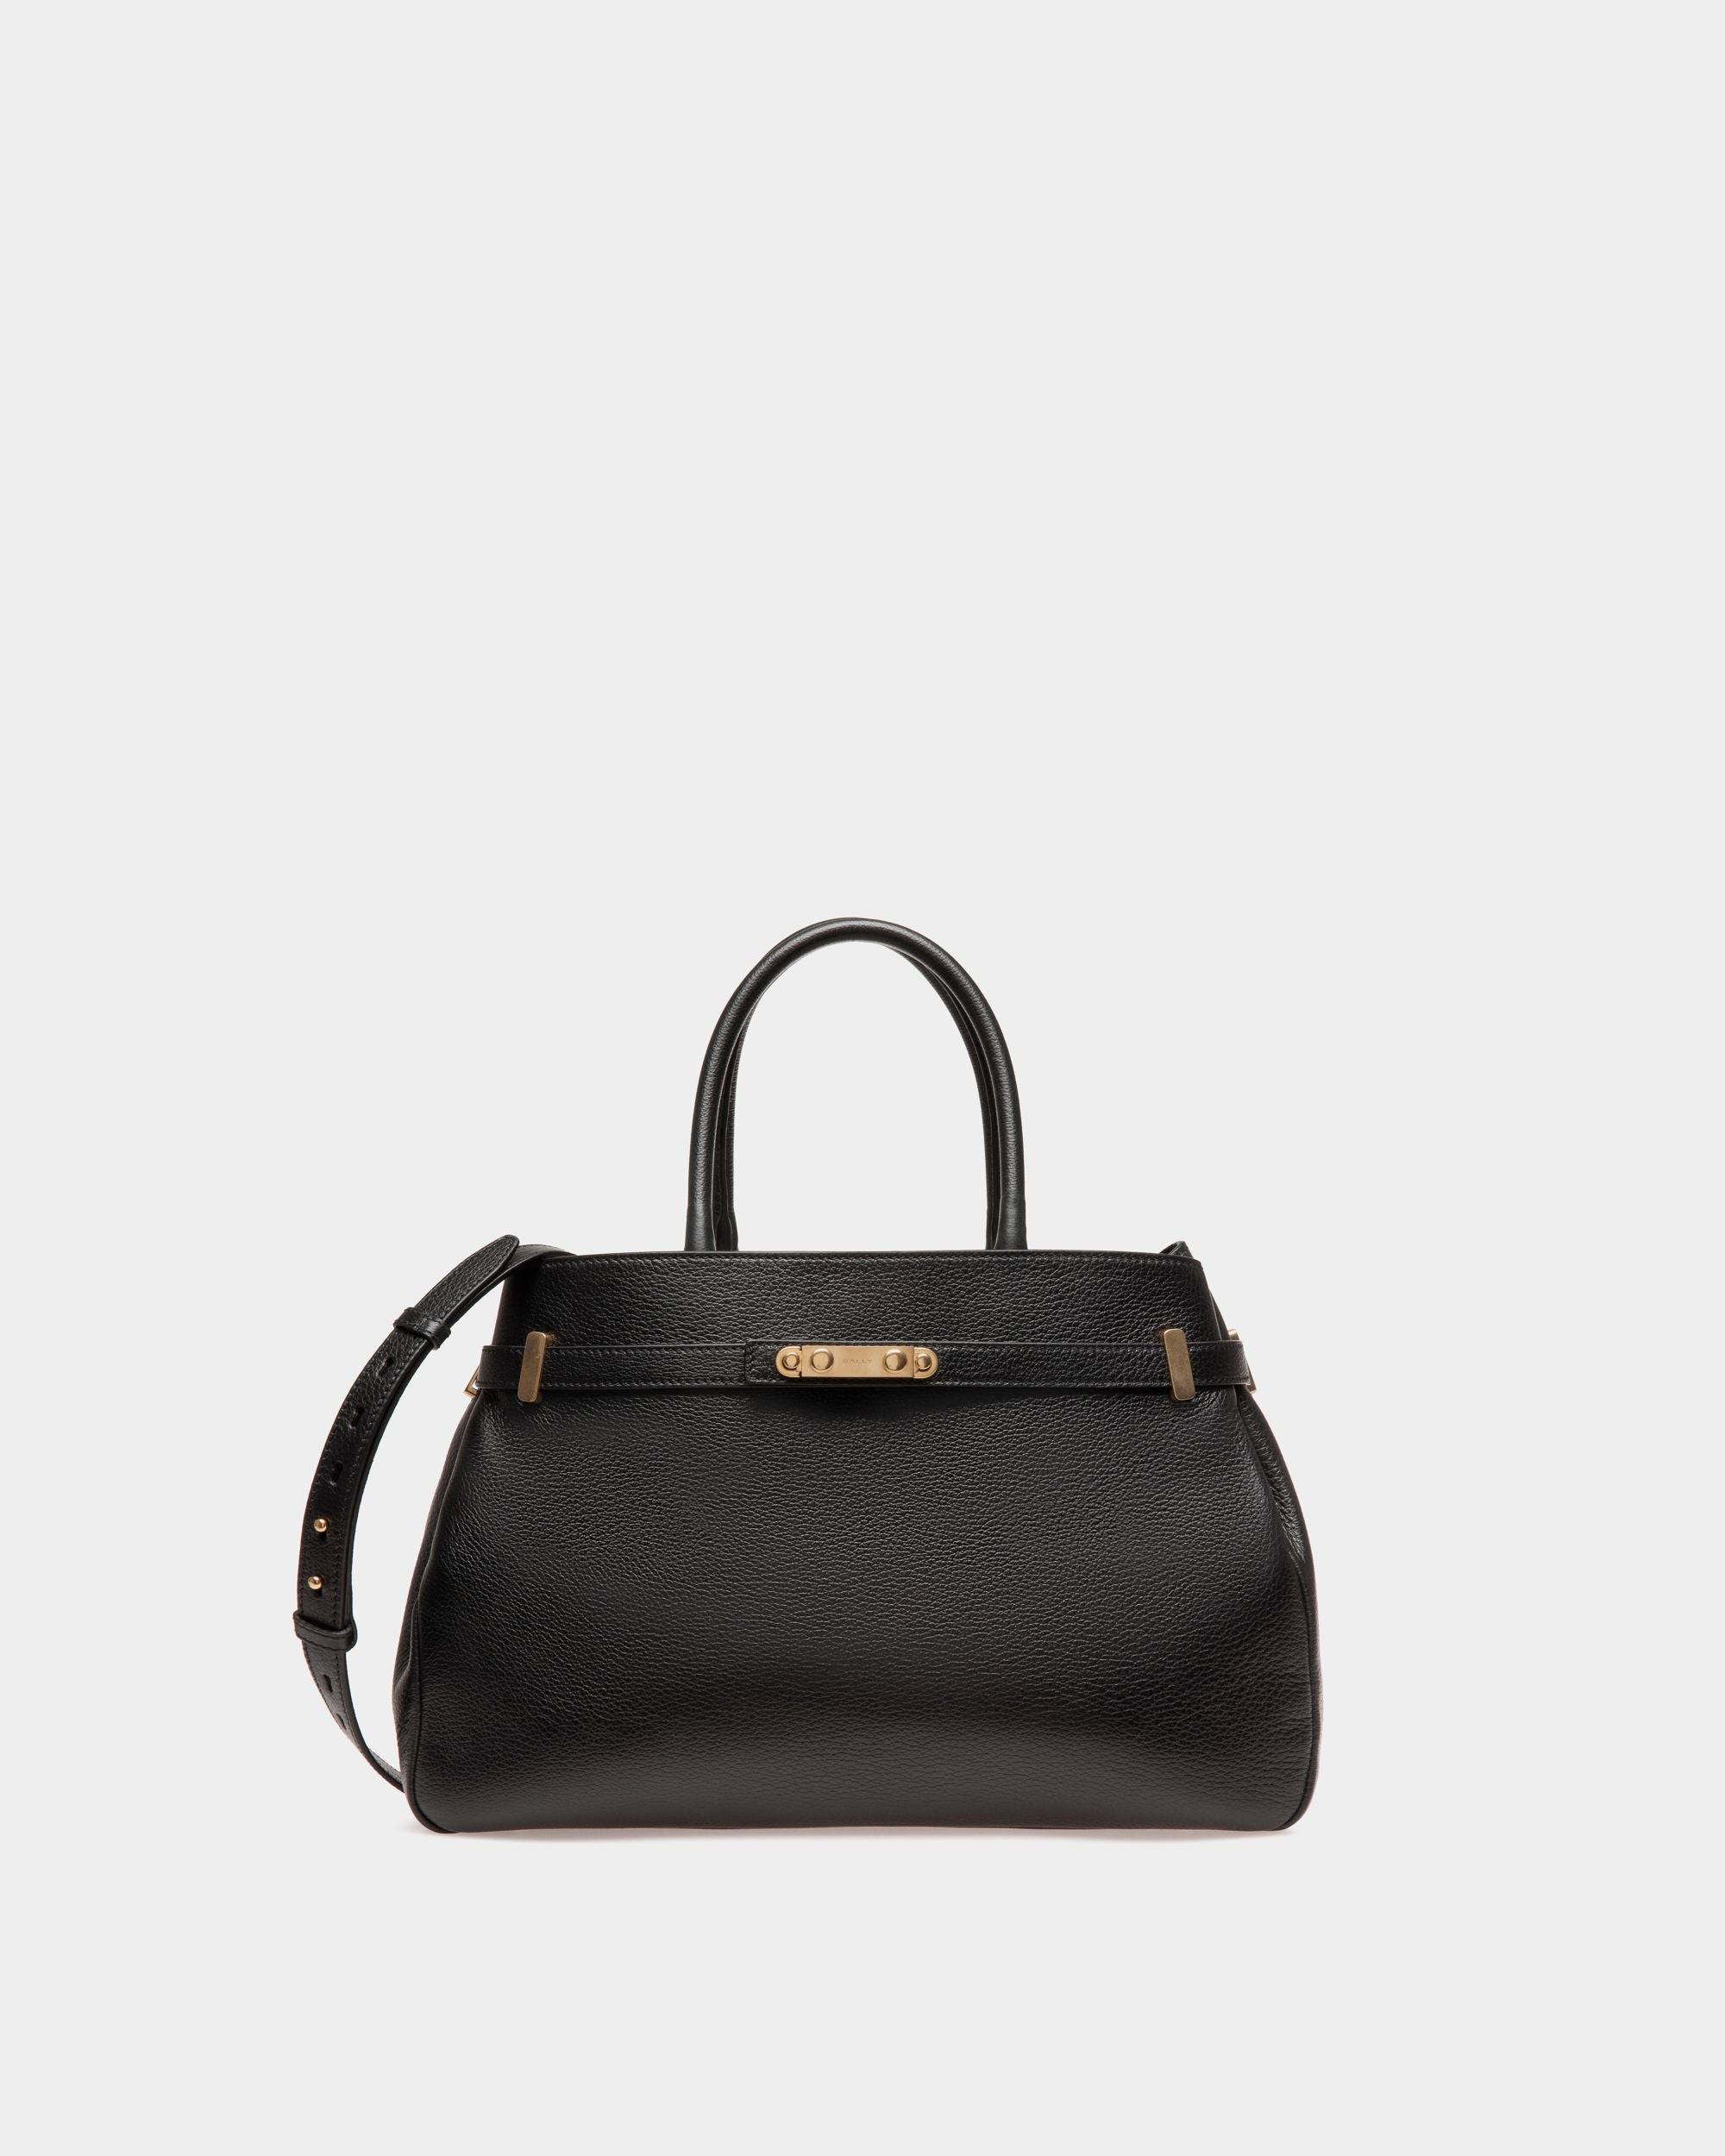 Carriage | Women's Tote in Black Leather | Bally | Still Life Front